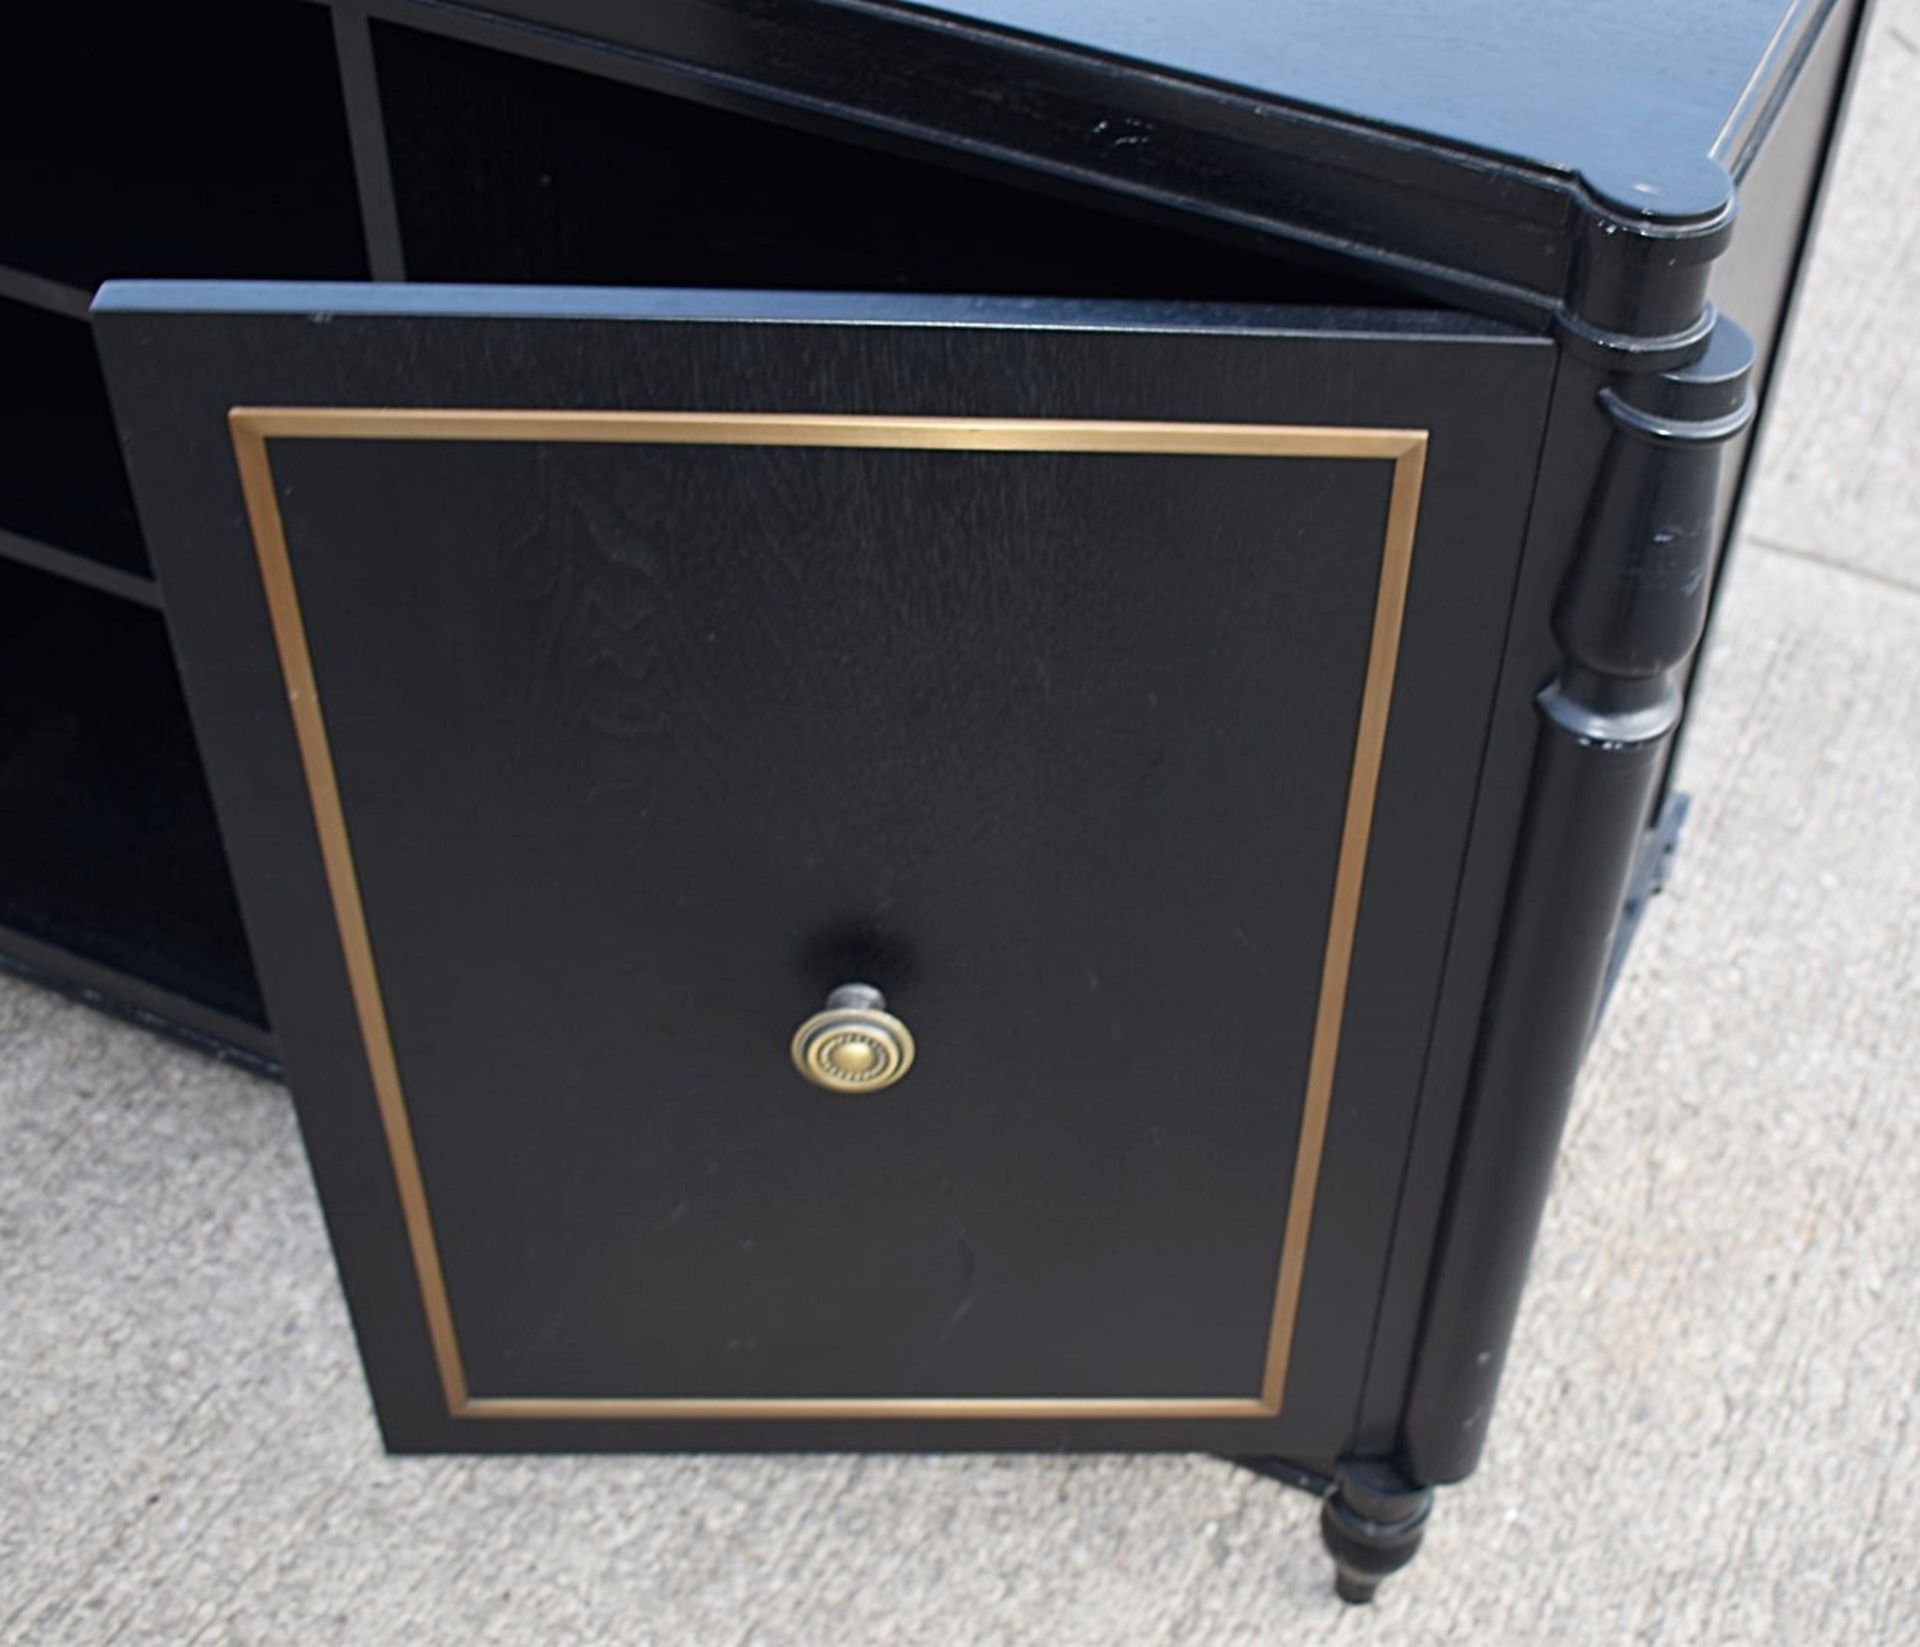 1 x Opulent 2-Door French Period-Style Handcrafted Solid Wood Cabinet in Black, with Brass Inlaid - Image 5 of 12